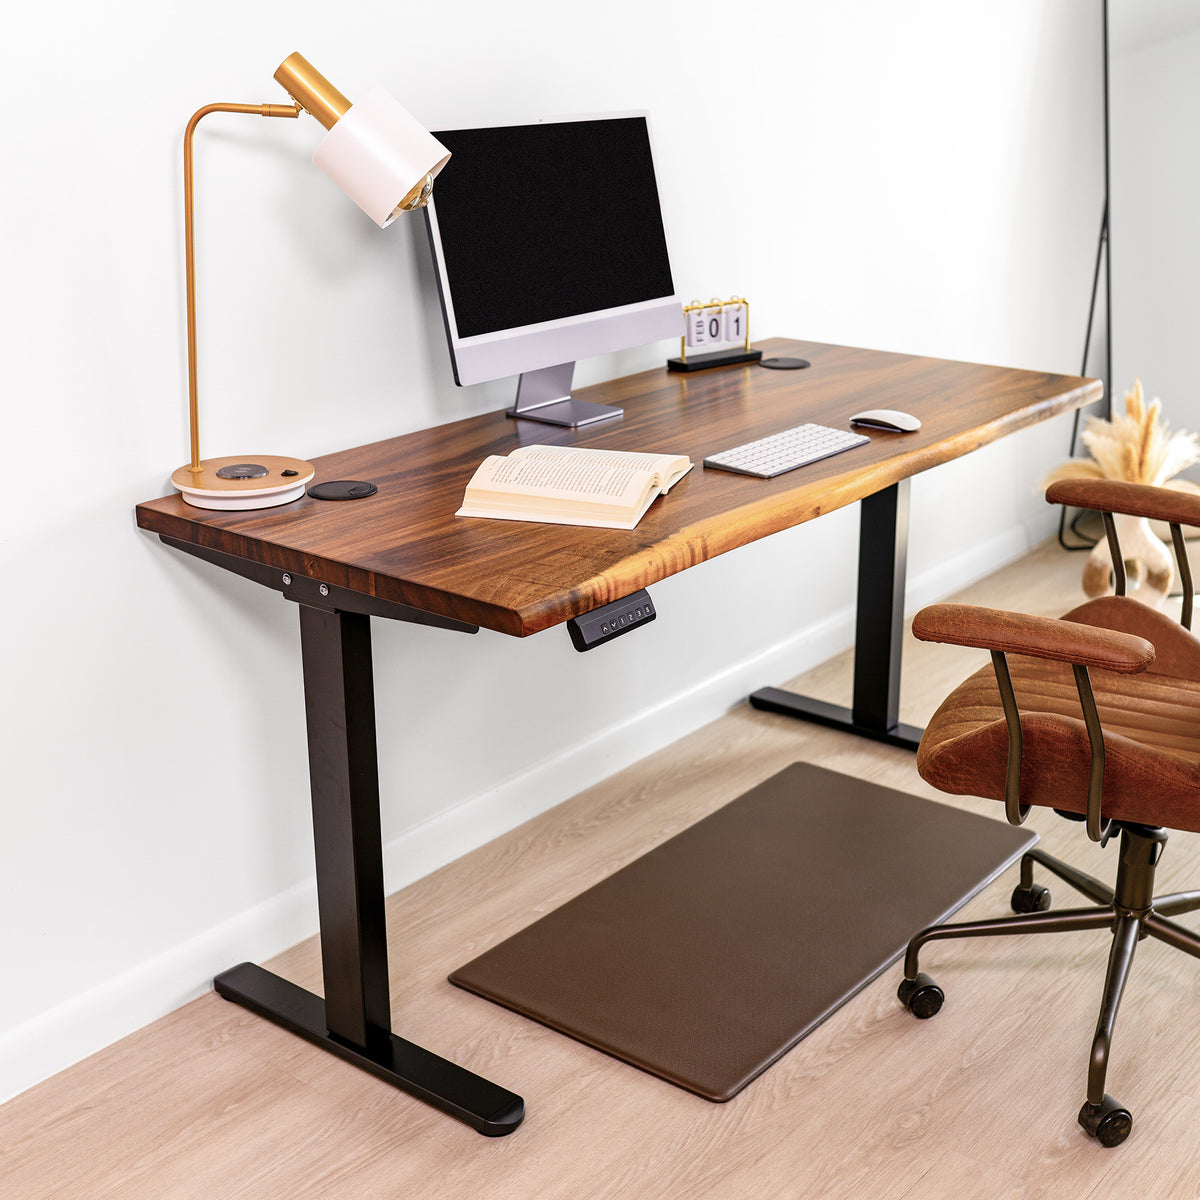 Wood Standing Desk with Drawers - Walnut Live Edge Wood Standing Desk - modernwoodstyle